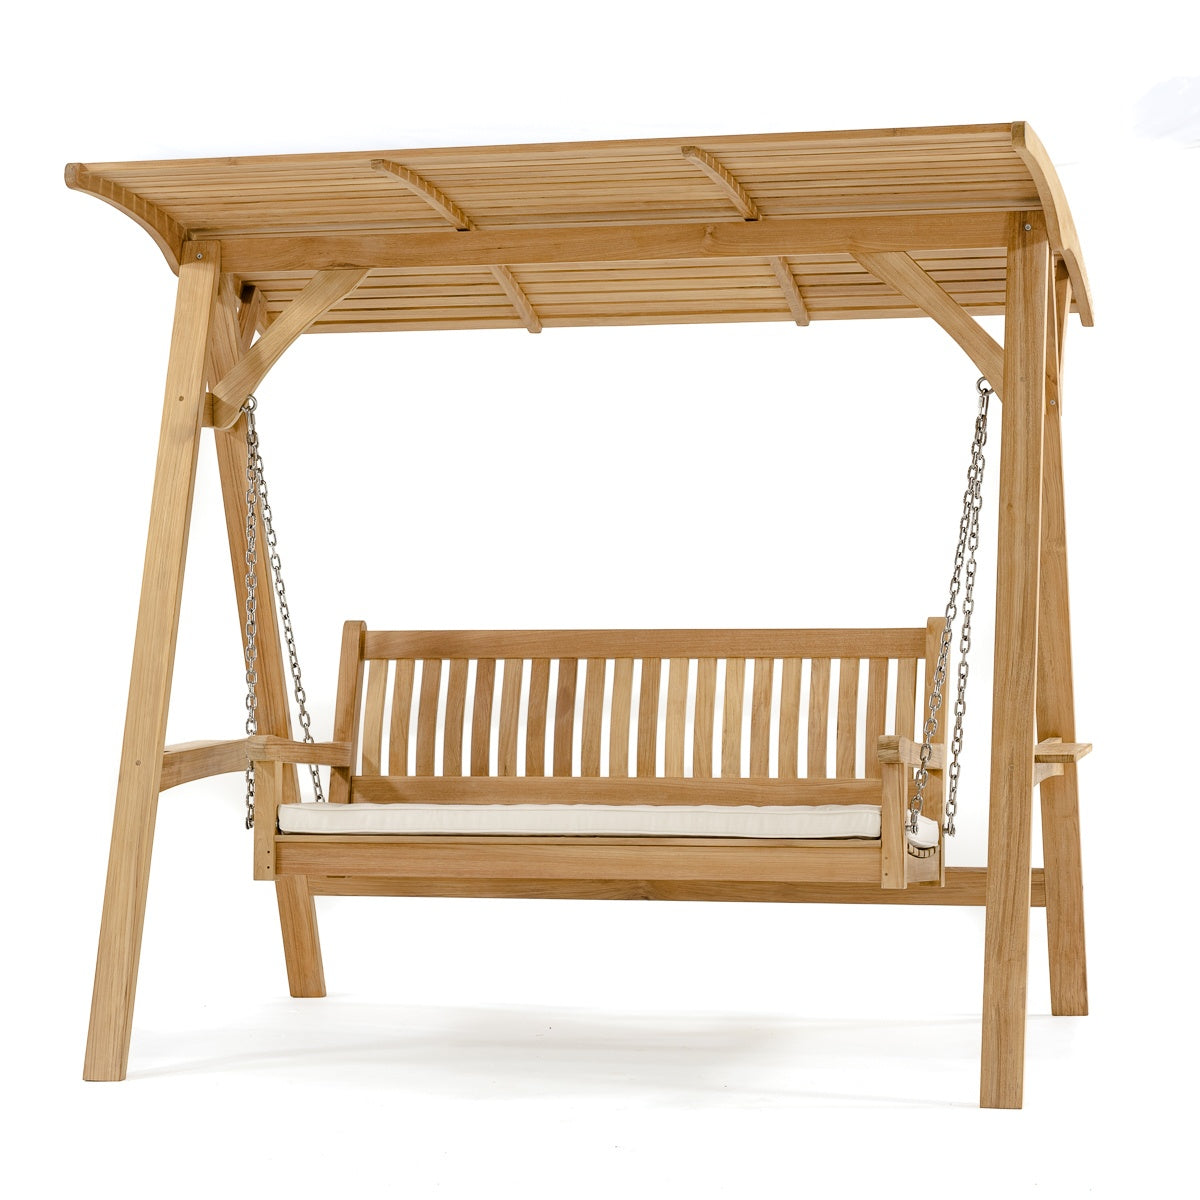 Westminster Teak - Veranda Swing Bench Set Includes Canopy and Bench - 13955